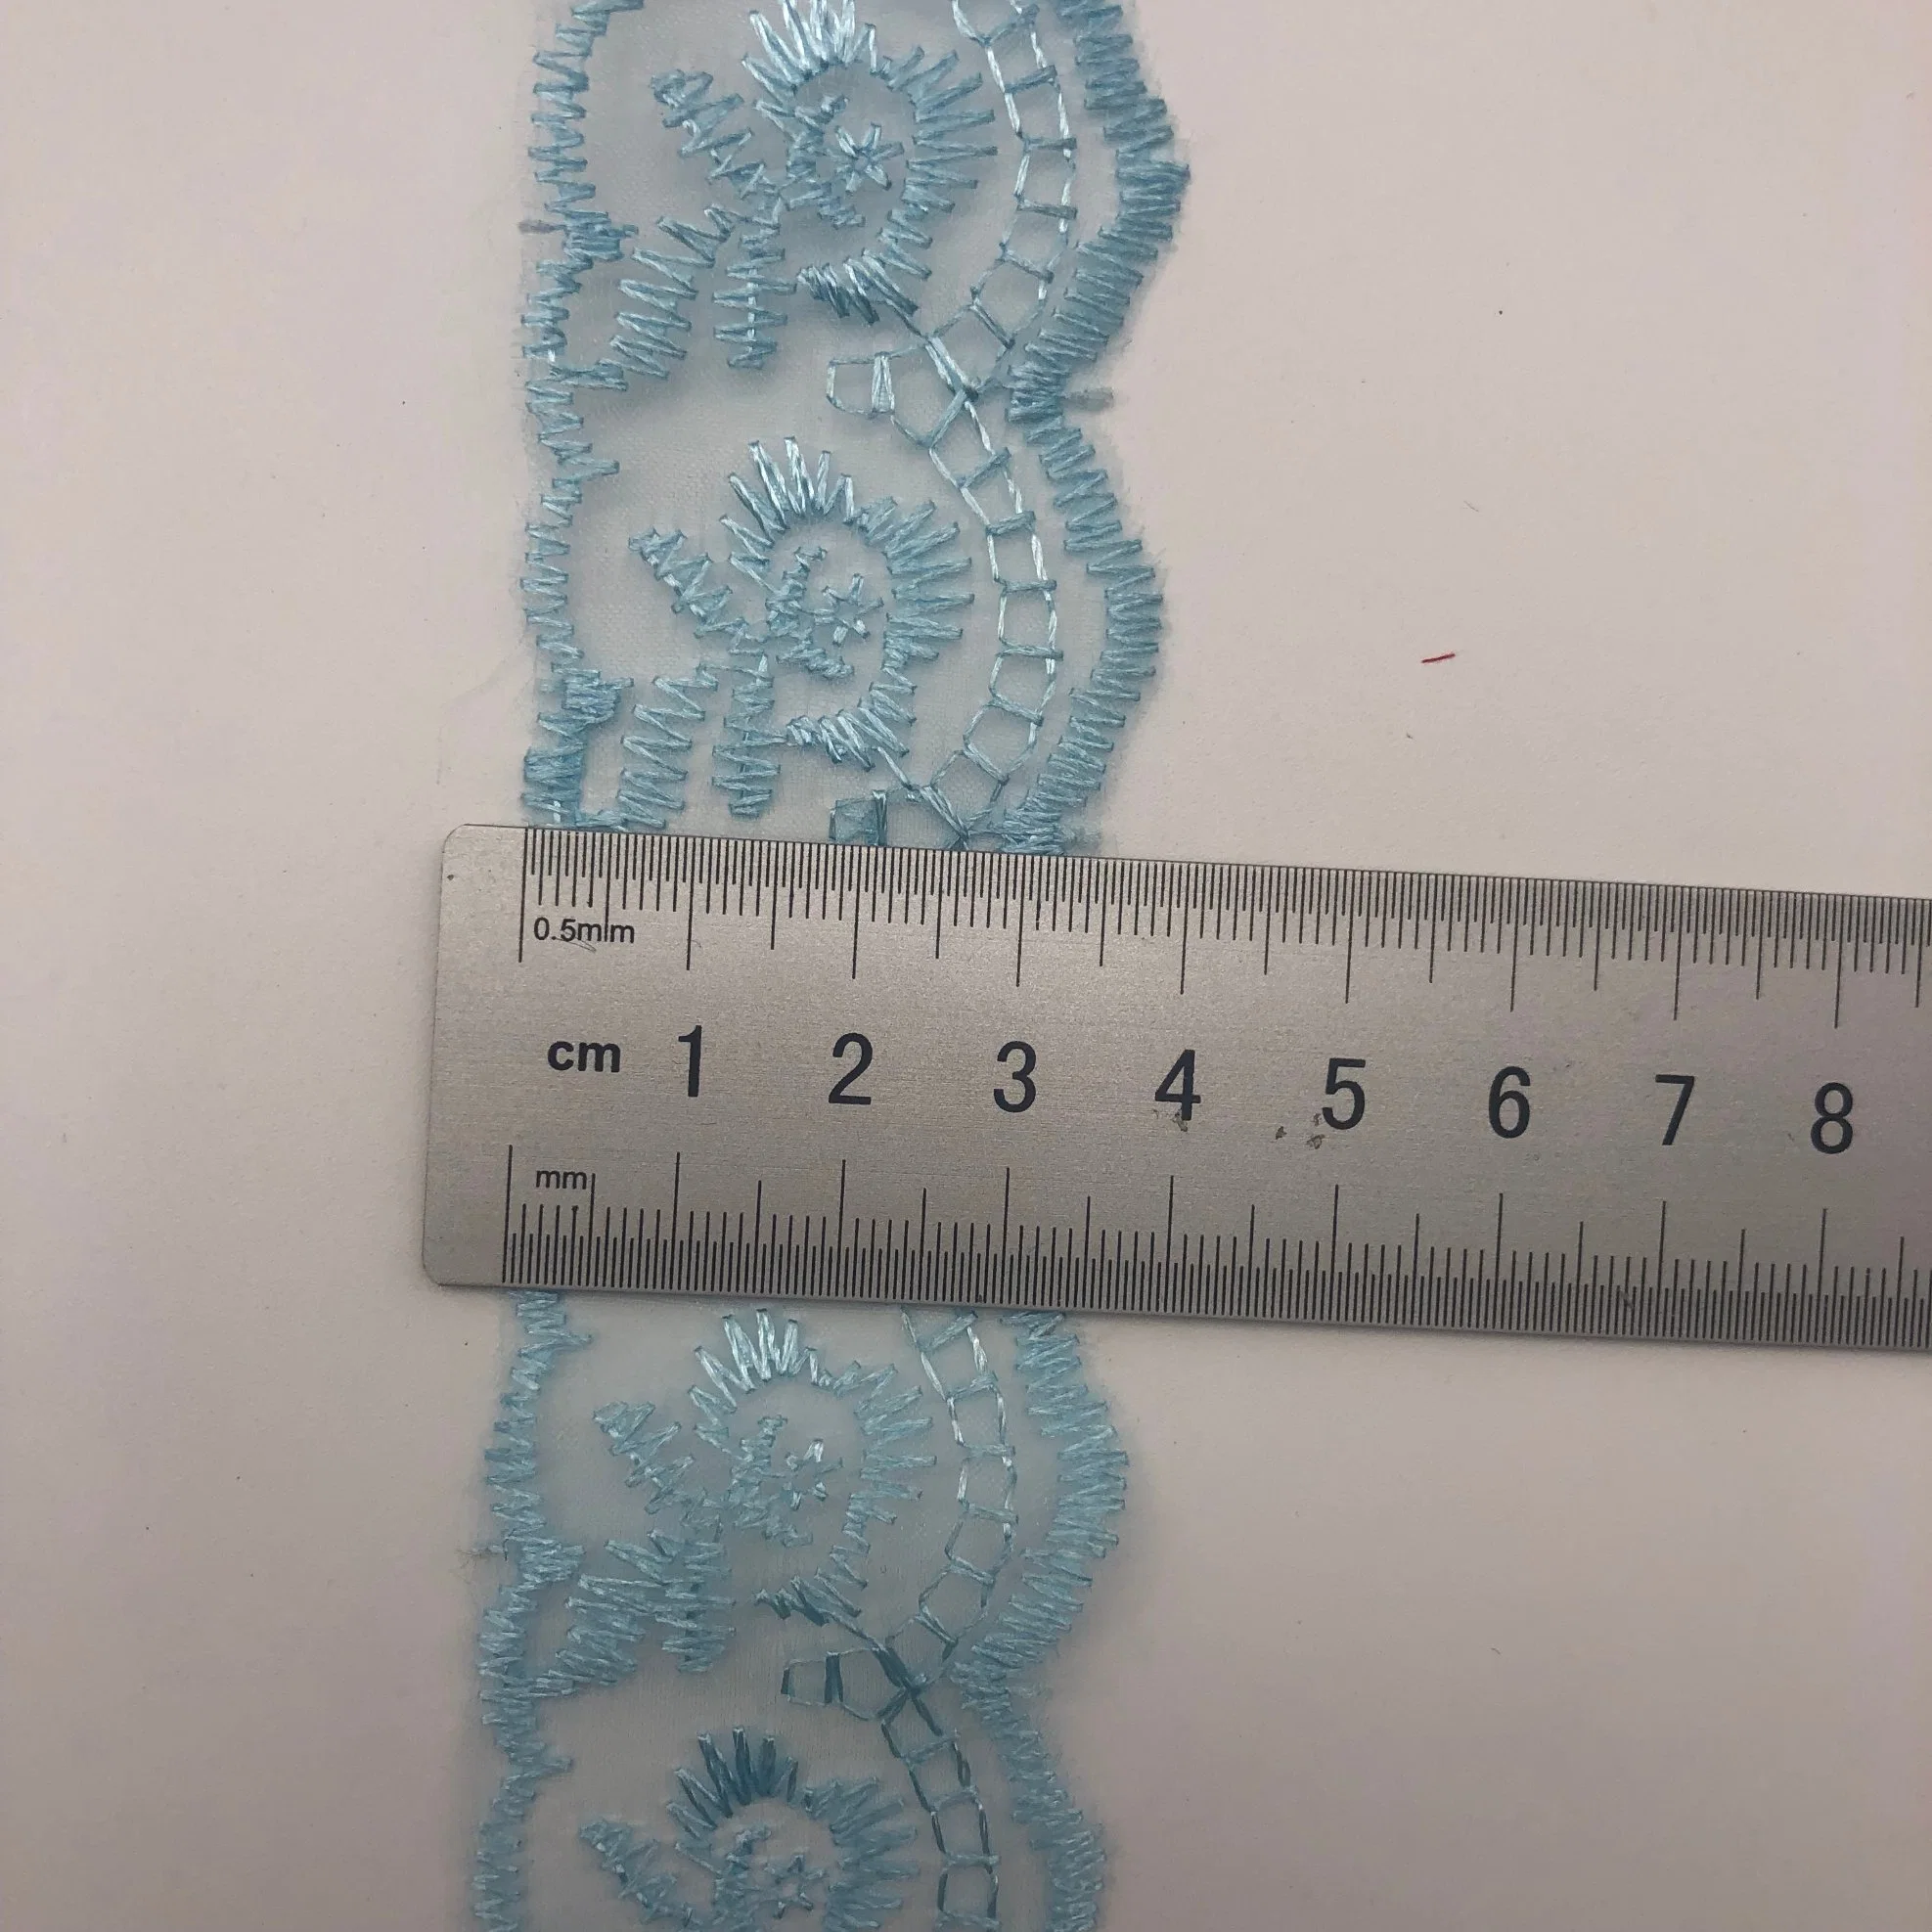 Flat Embroidery Lace/ Broderie Anglaise Lace Trim, Bordado Ingles COM Passa Fita Lace Fabric